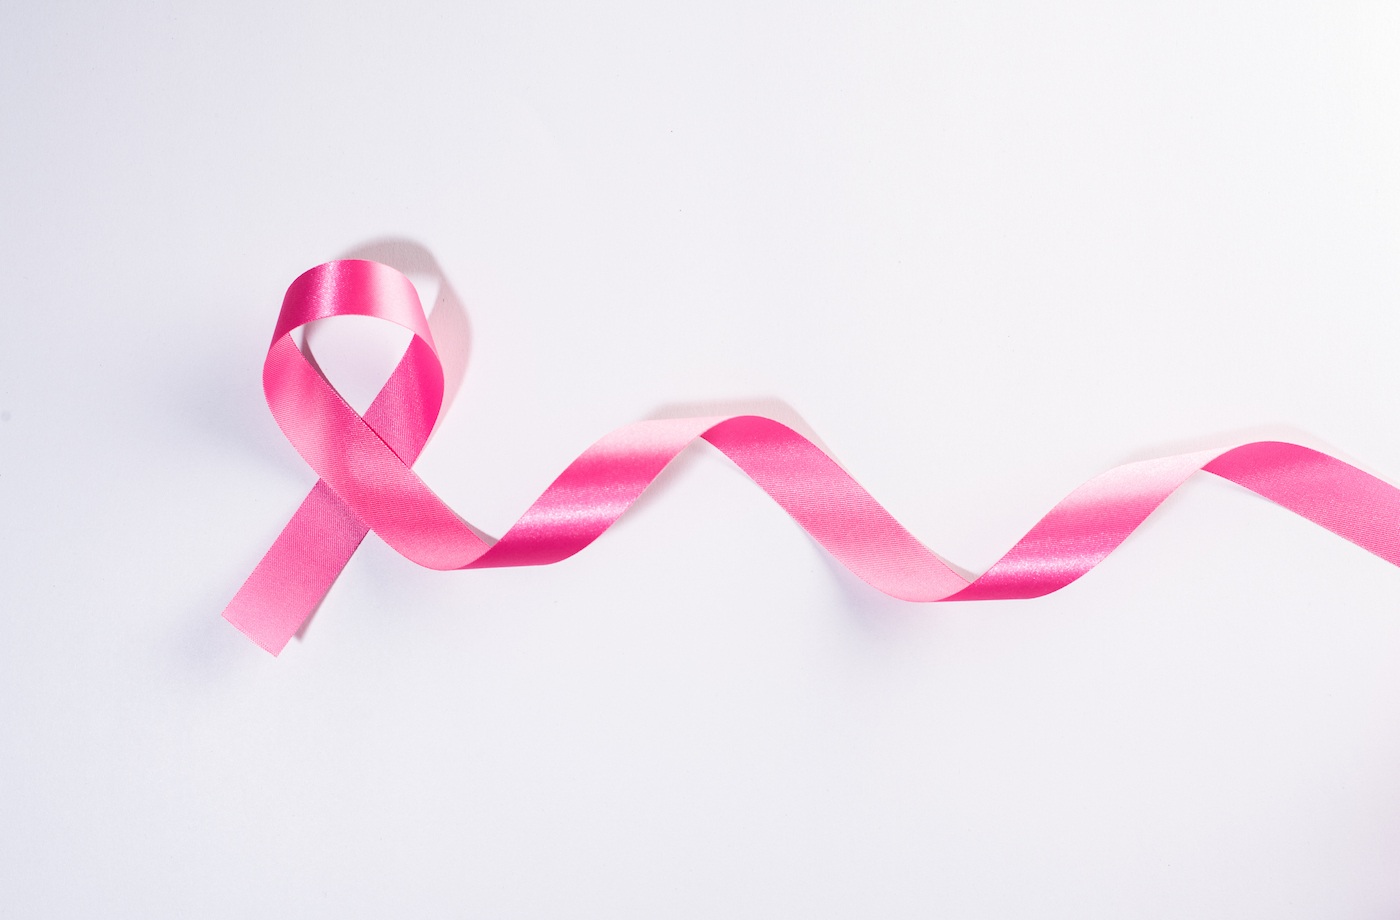 breast cancer awareness and disease prevention